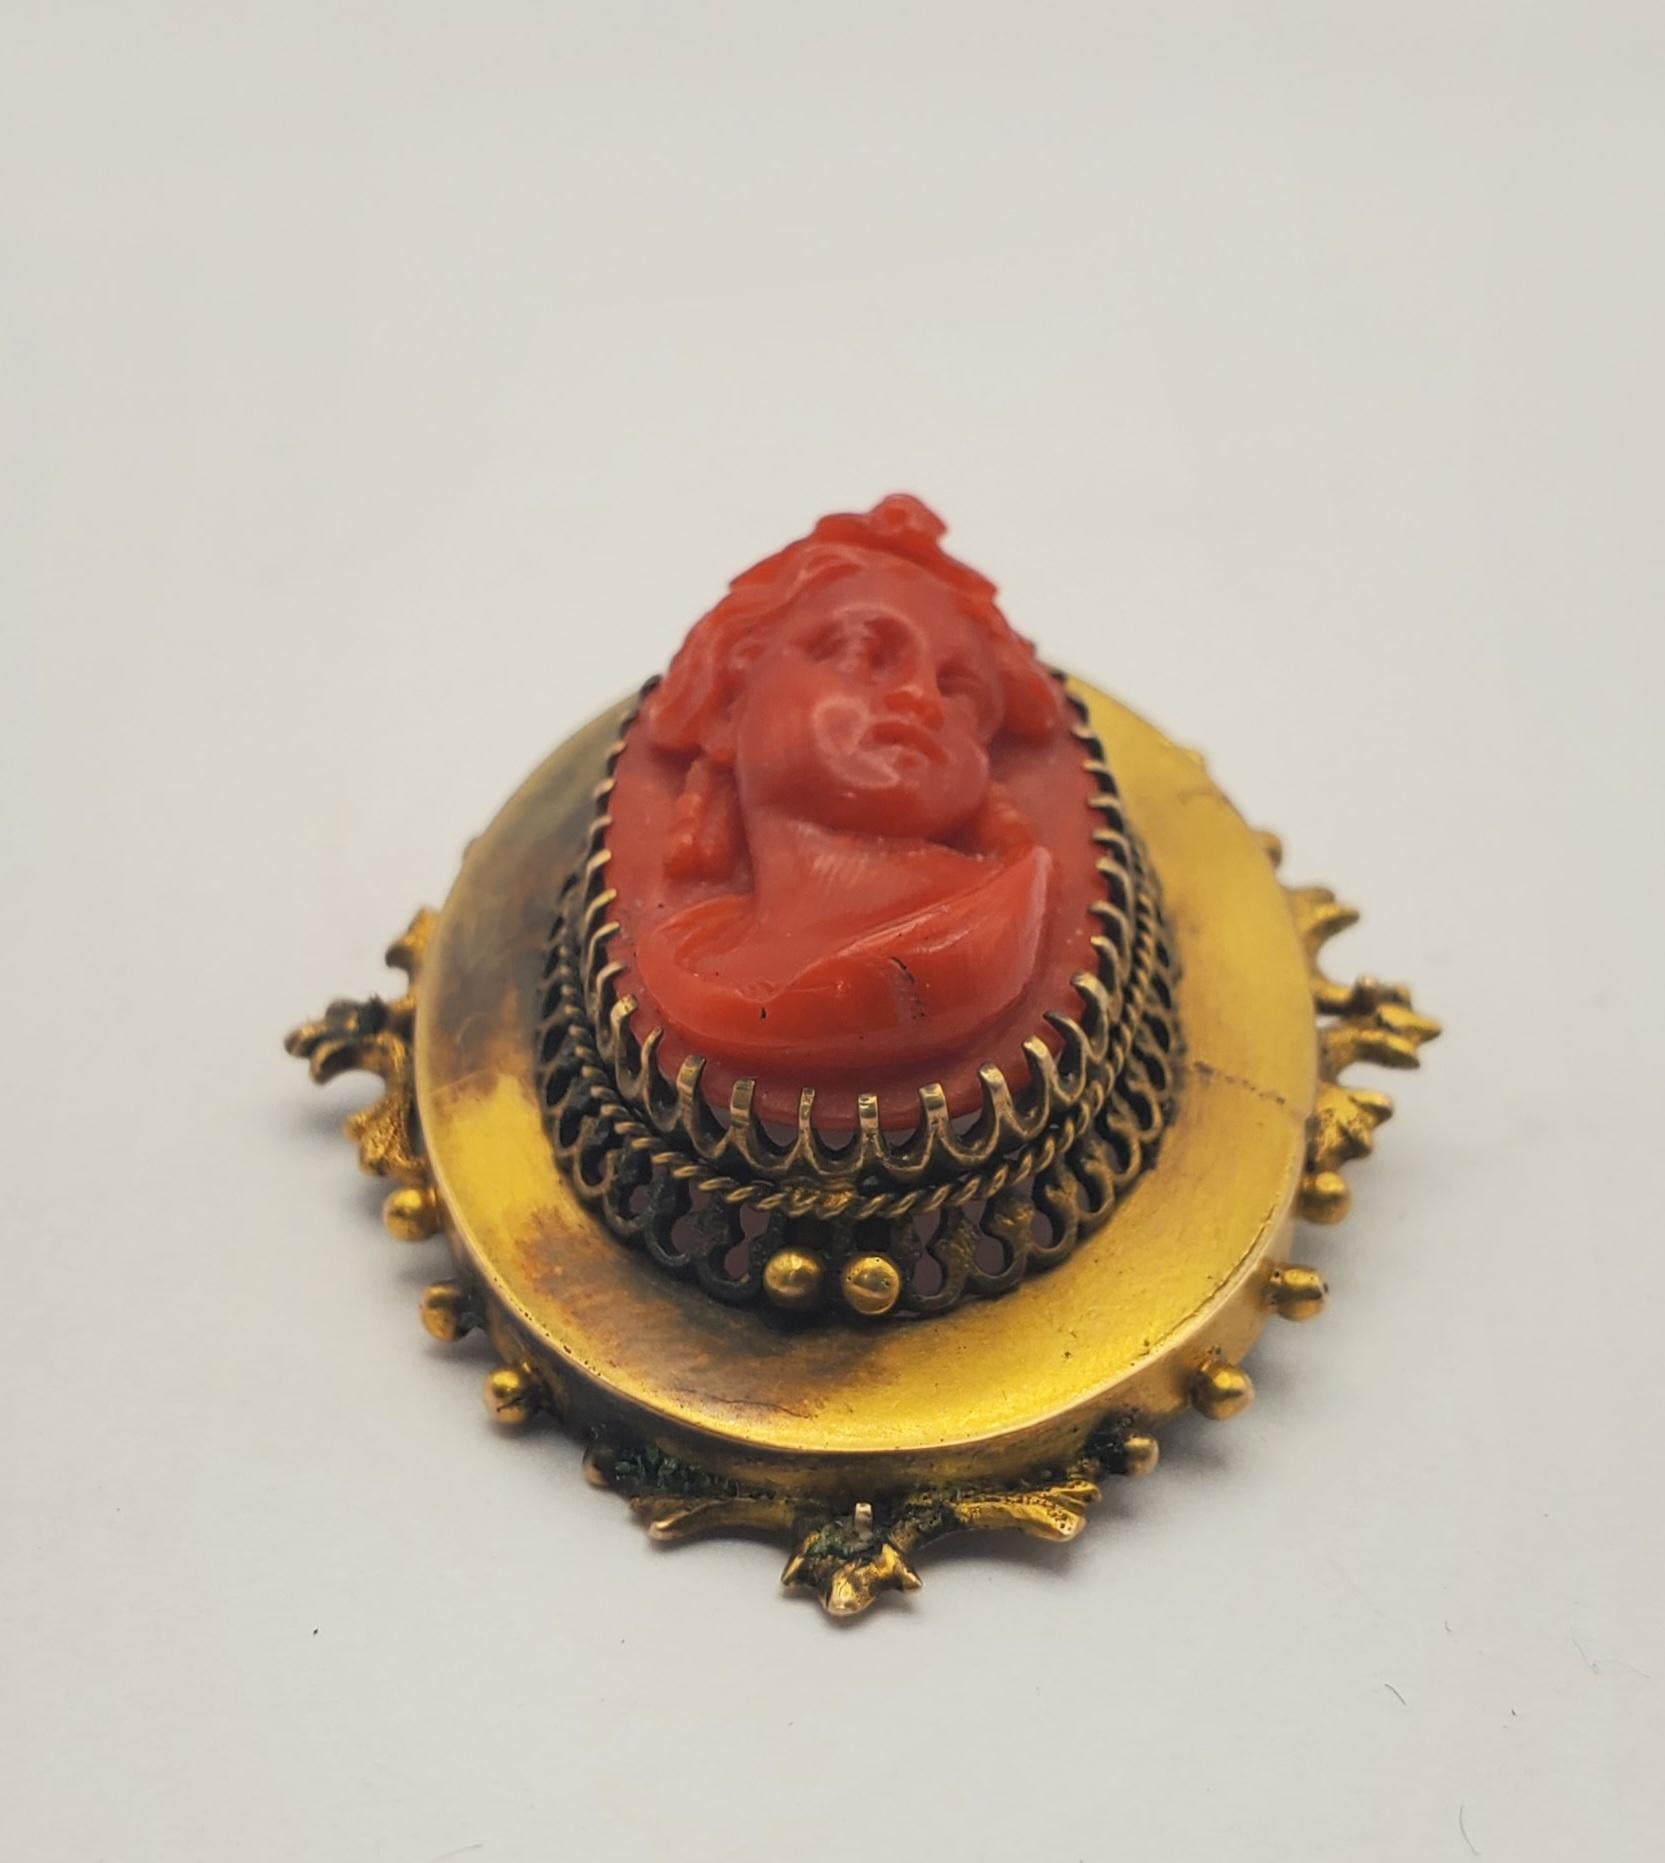 Gorgeous 14k yellow gold and Mediterranean coral cameo convertible pendant/brooch. This antique piece features a lady with elaborate curly hair in right-facing quarter profile position. The bold vermillion color of the Mediterranean coral looks